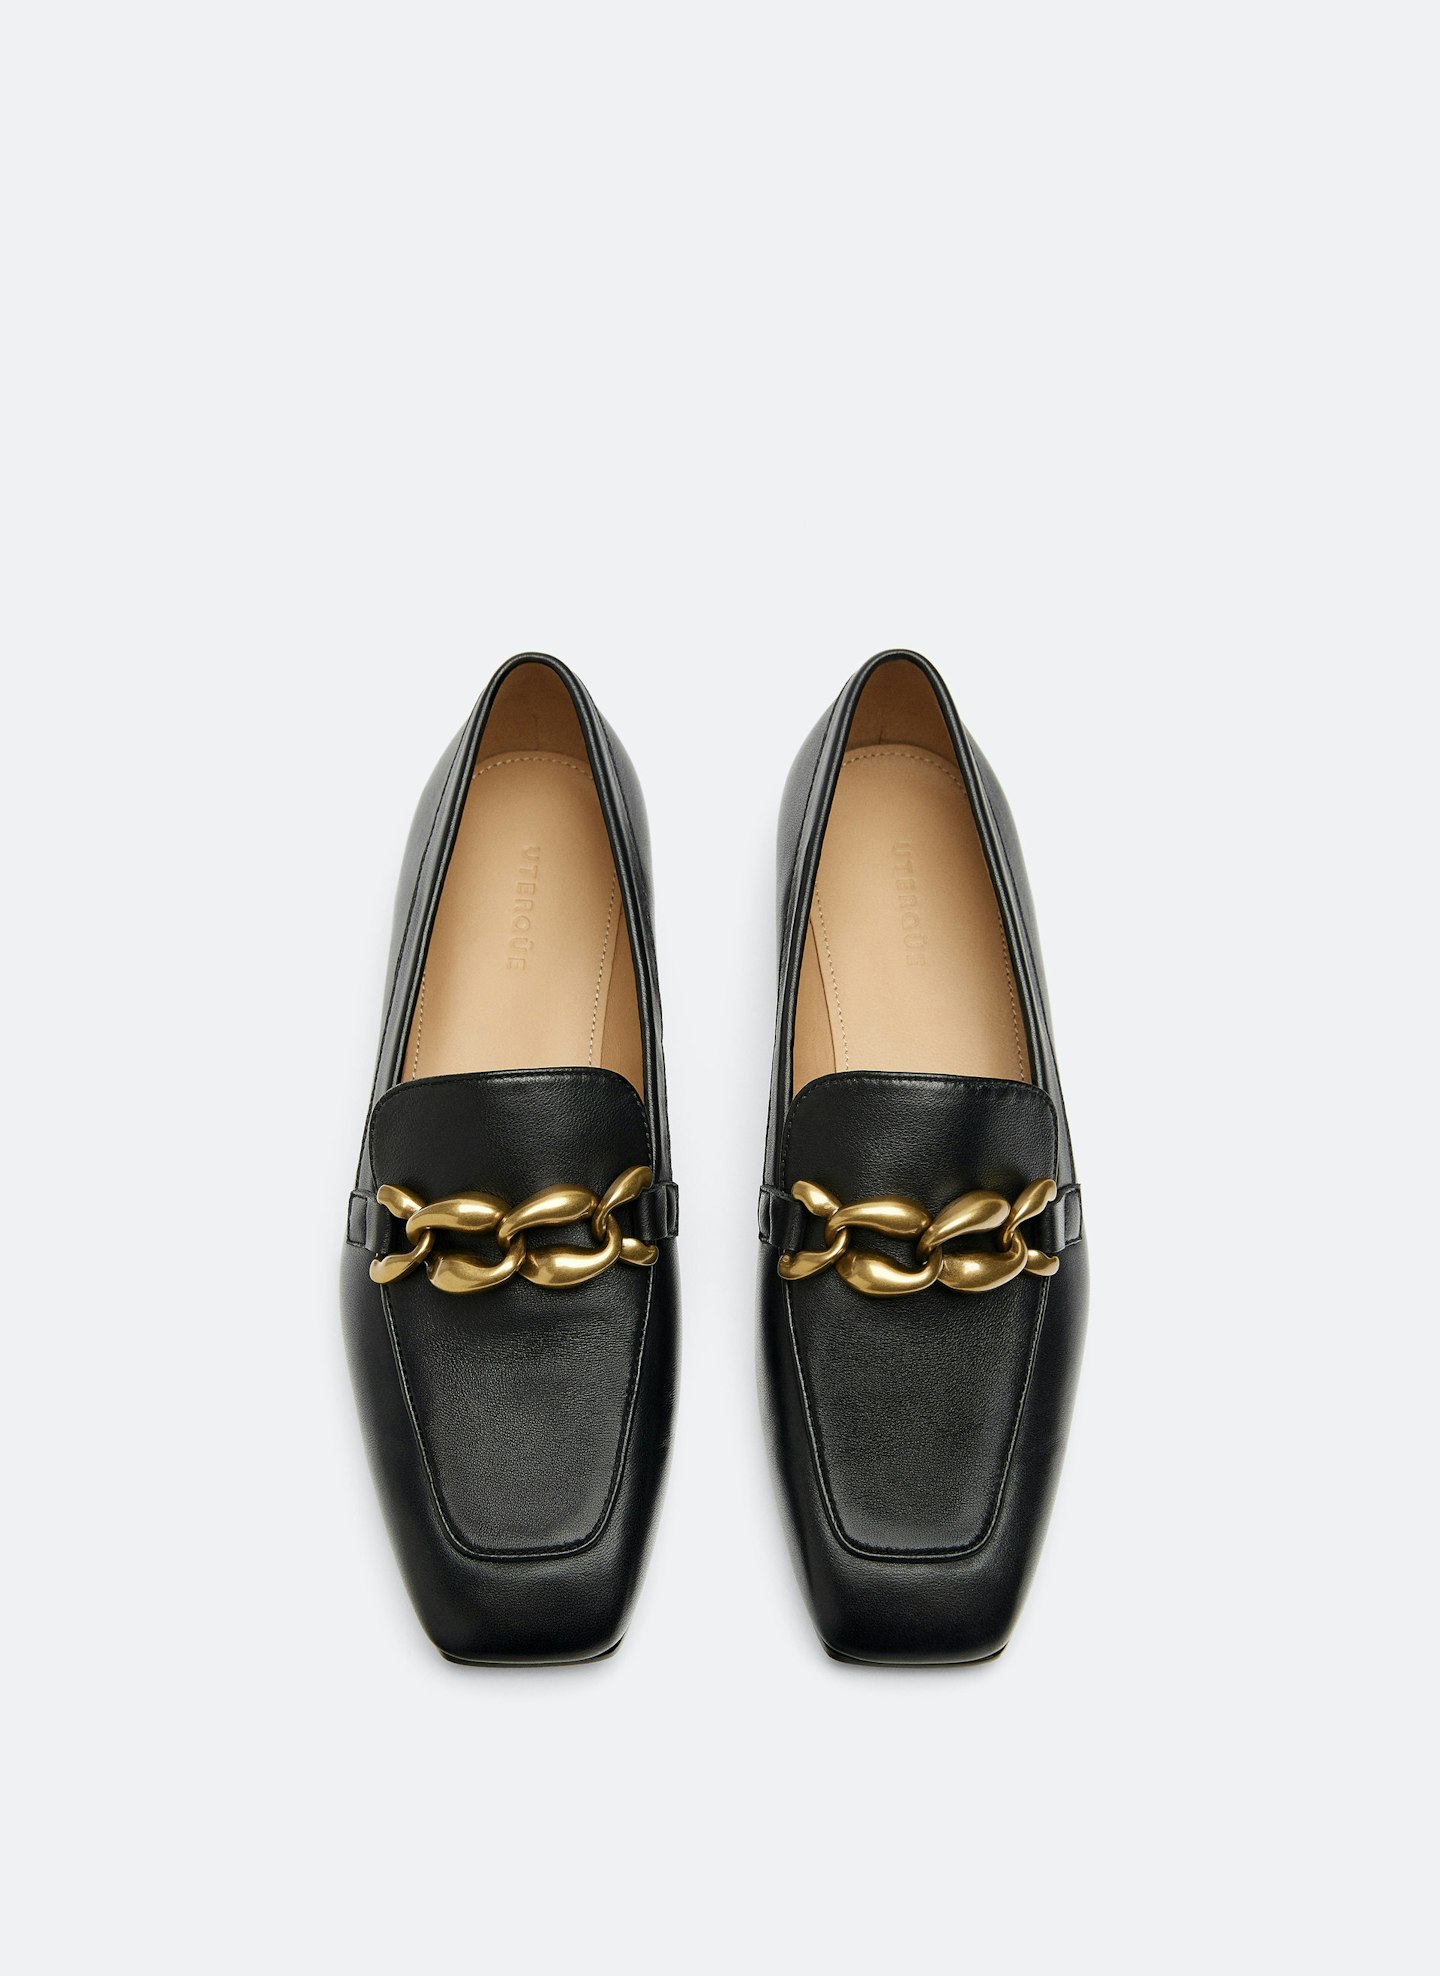 Uterque, Leather Loafers With Chain, £99